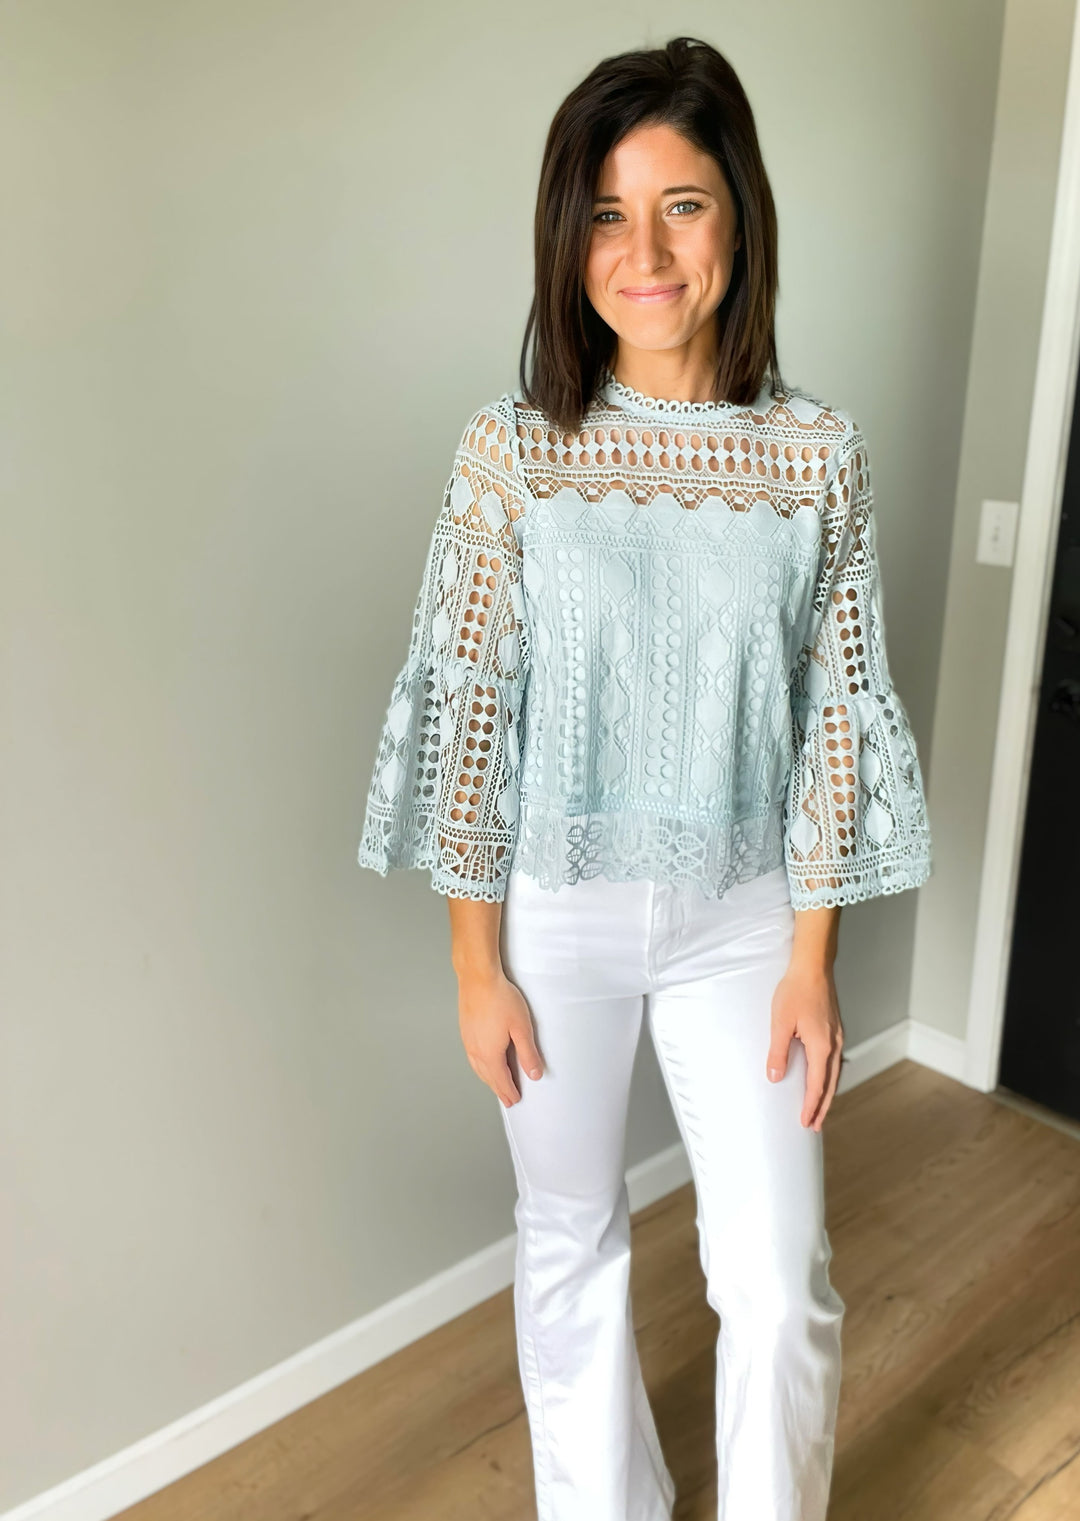 Baby Blue Lace Sleeve Top with Bell Sleeves and White Pants